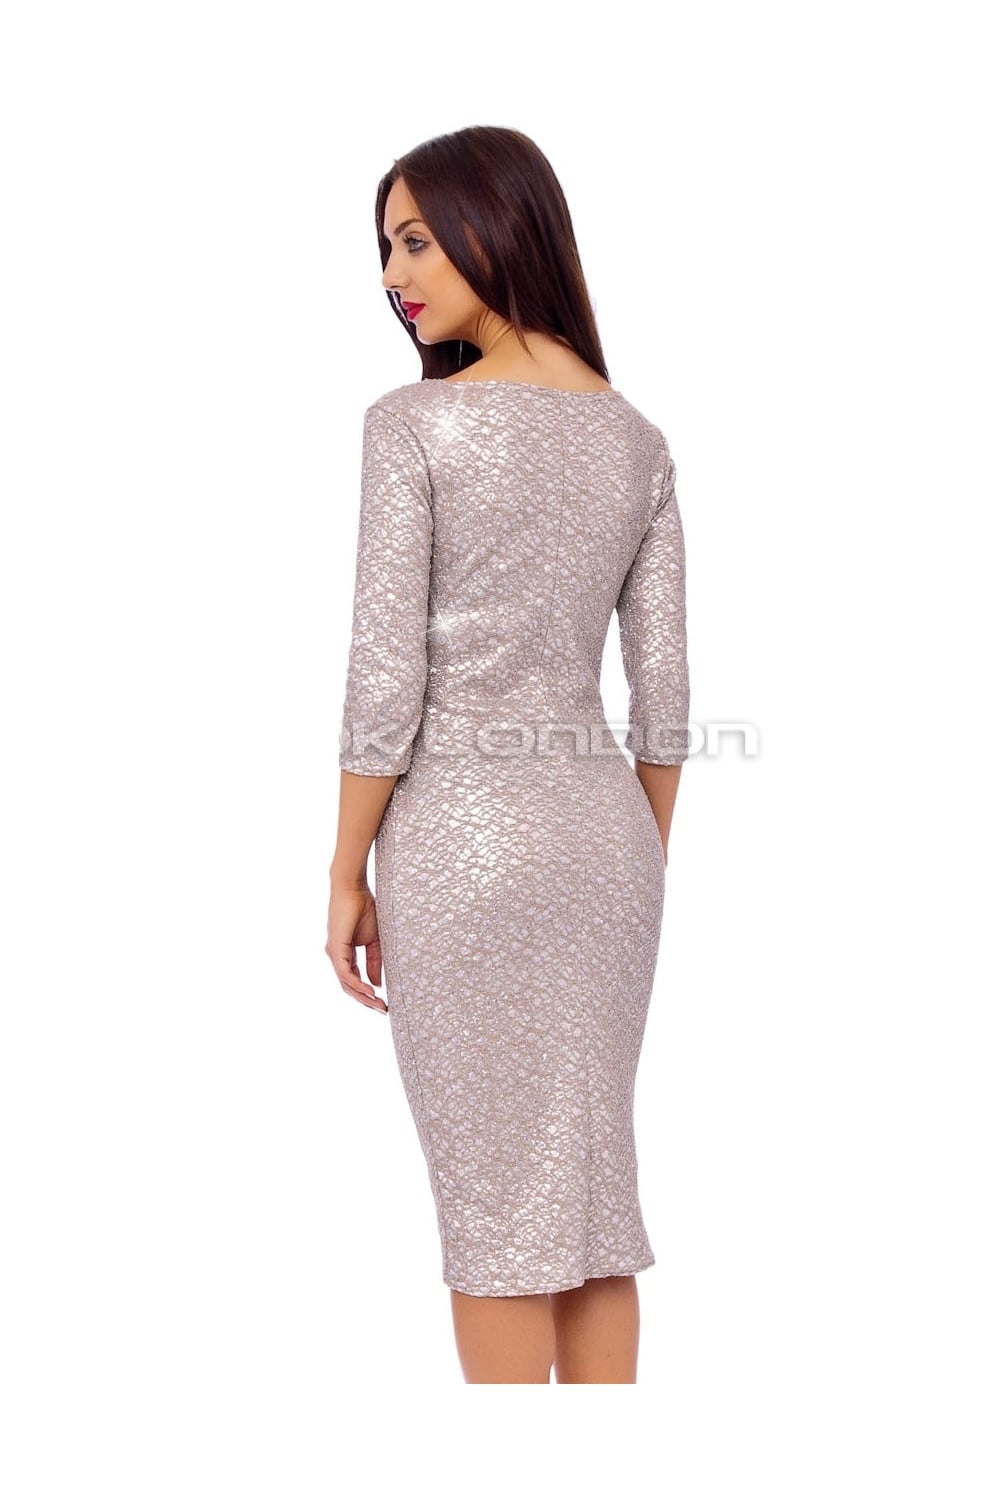 Giltter Lace Overlay Midi Dress in SIlver - Back View